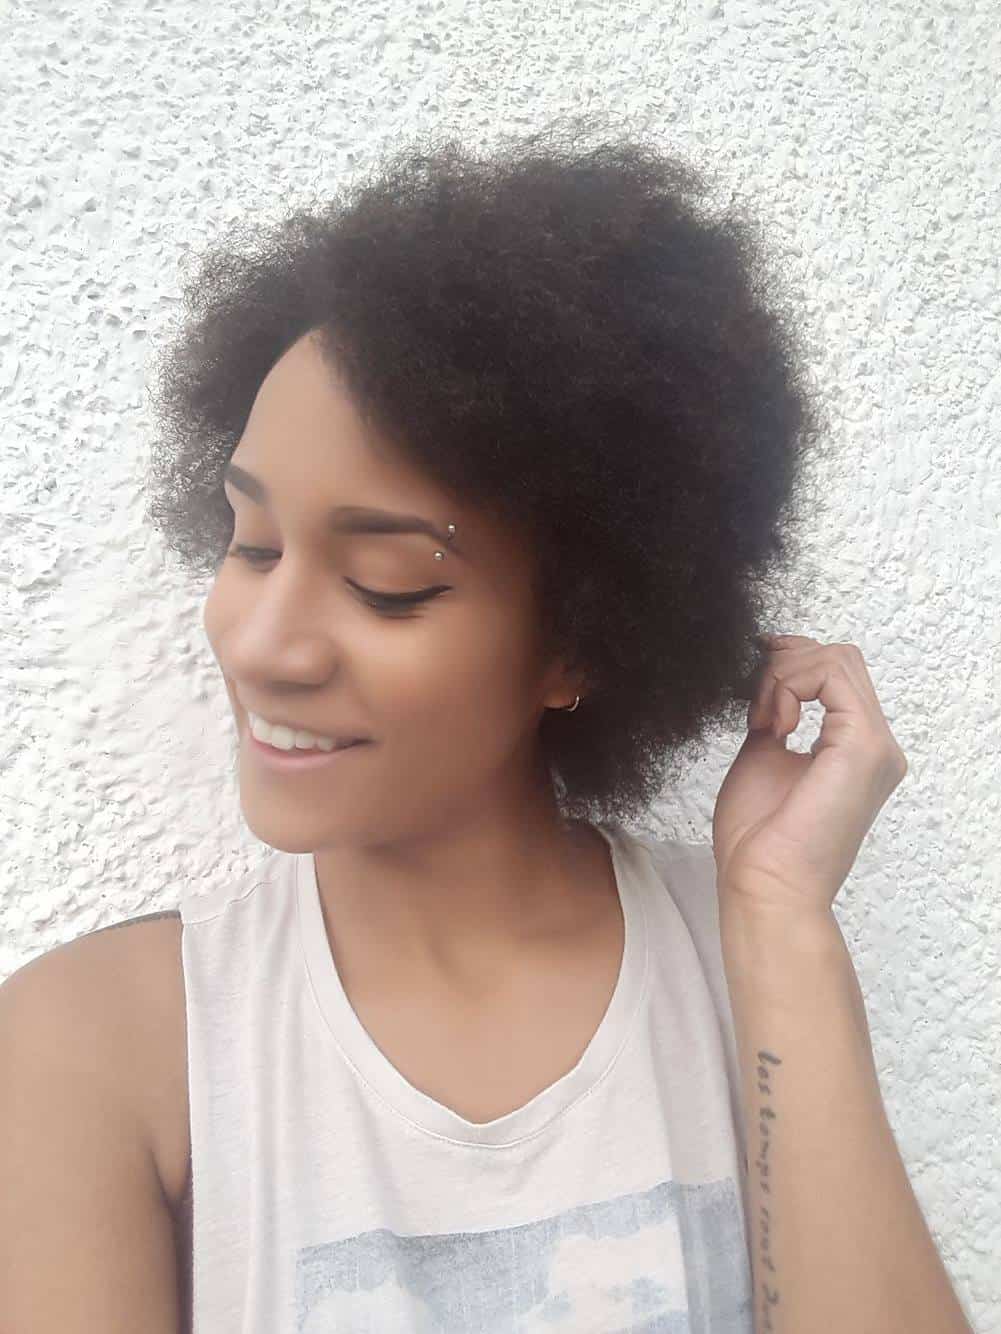 Xandria's 10 Month Post Big Chop Update - Her Natural Hair Journey from then to now.